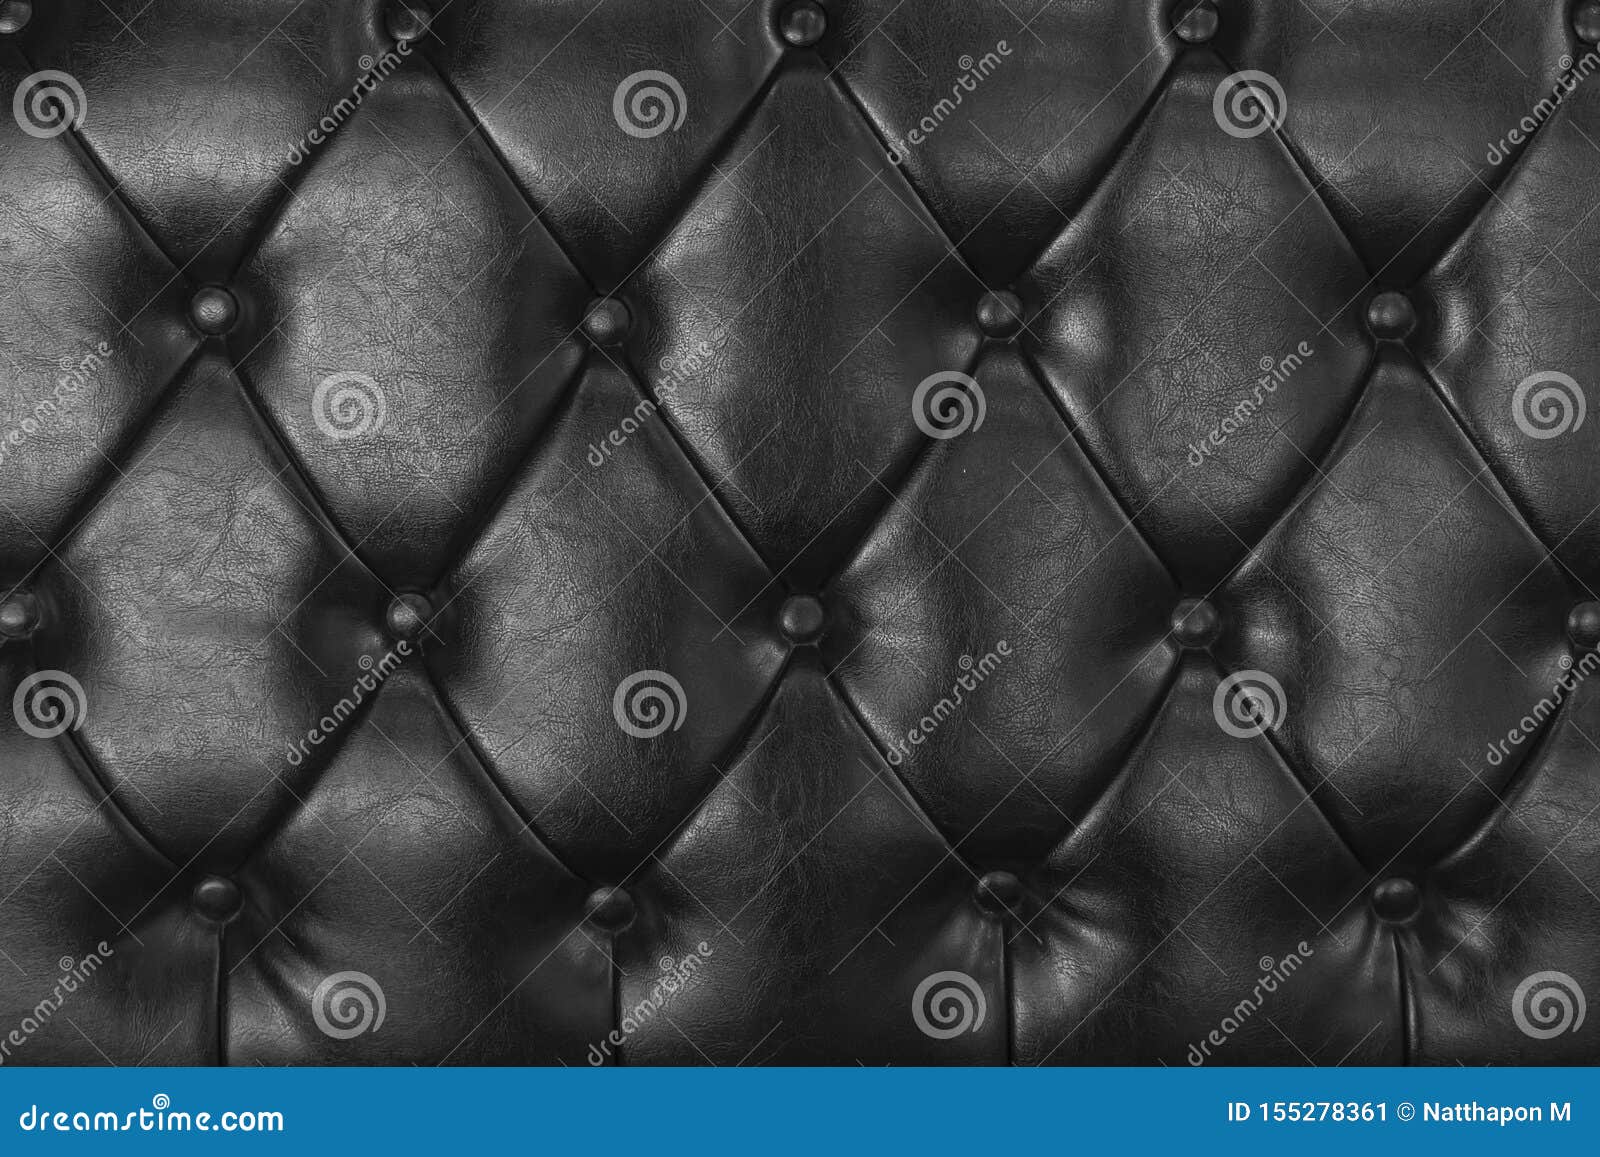 leather sofa texture seamless background, leathers upholstery pattern